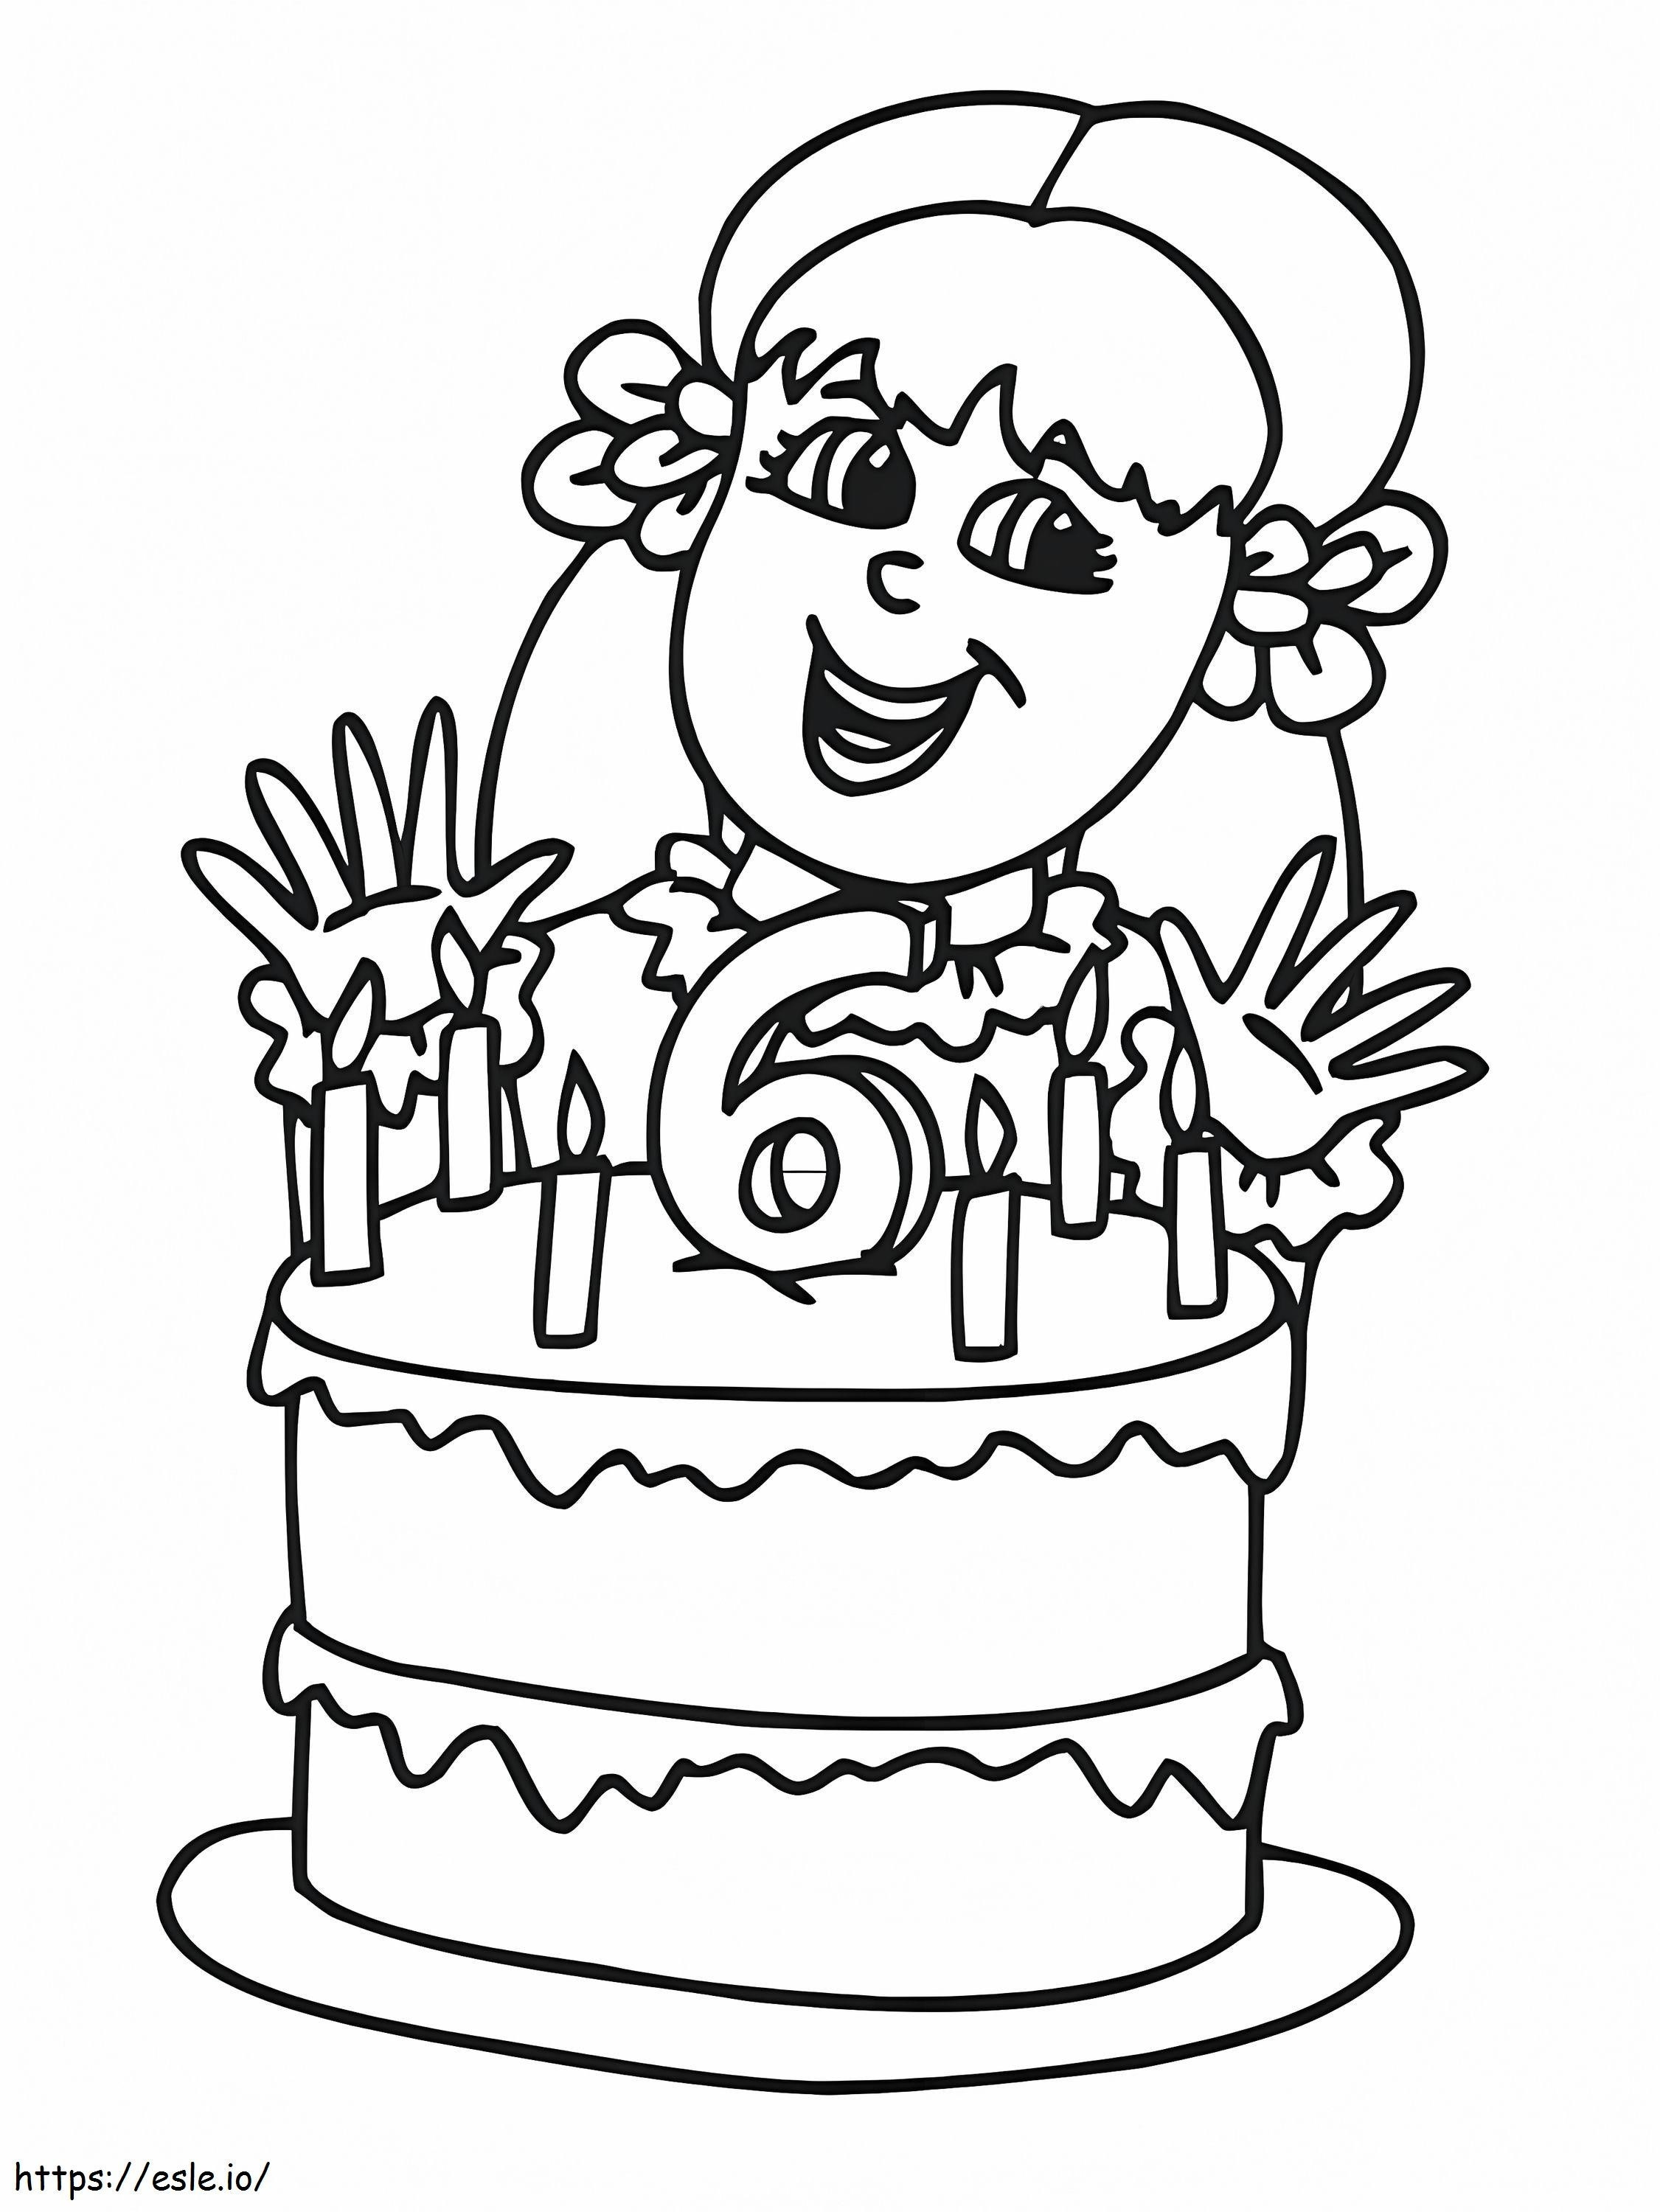 Little Girl With Birthday Cake coloring page